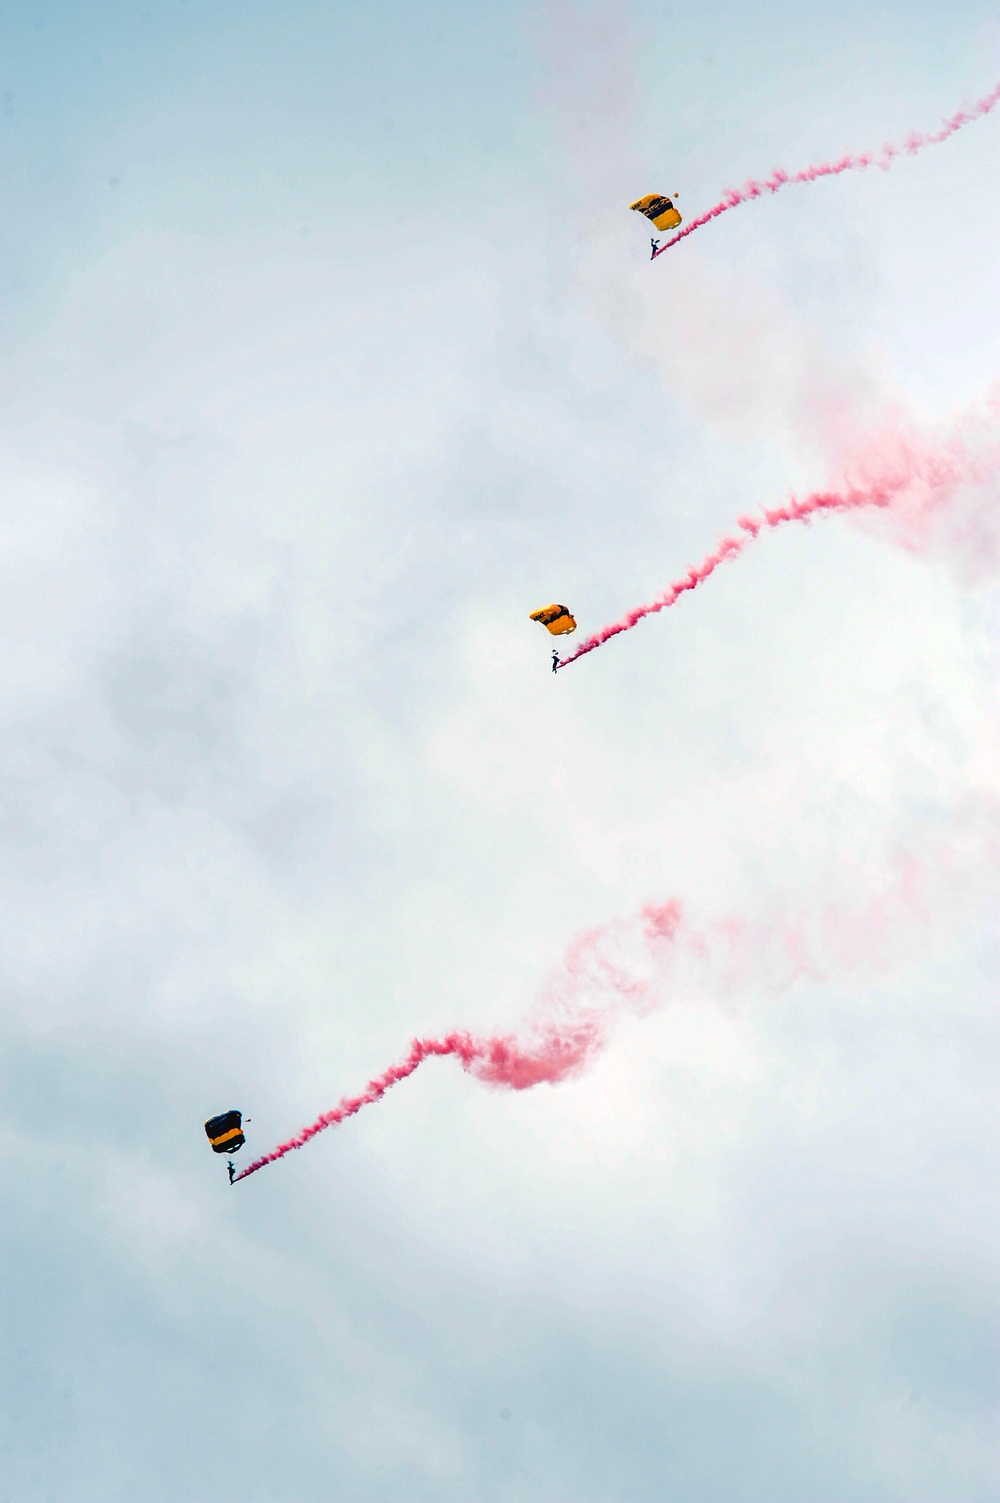 DVIDS Images 'Wings Over Whiteman' wows crowds [Image 3 of 14]